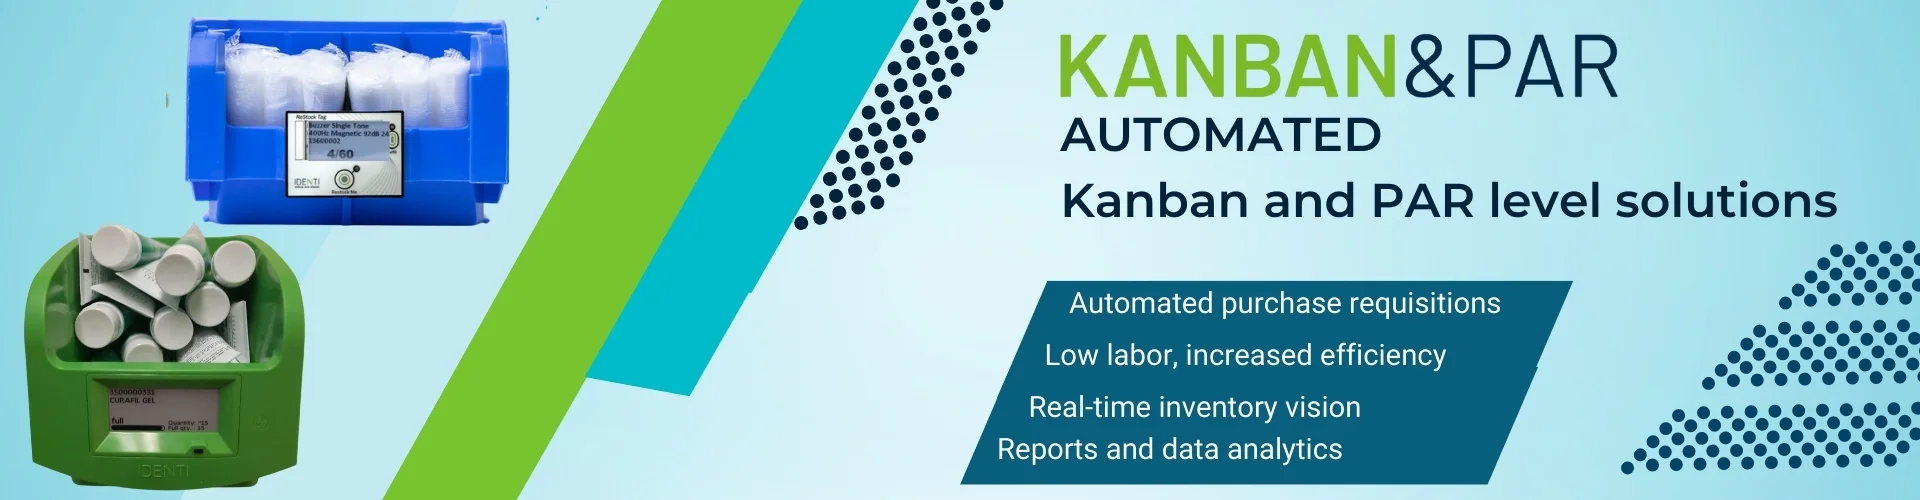 Automated Kanban and PAR level solutions for precise medical supplies management.